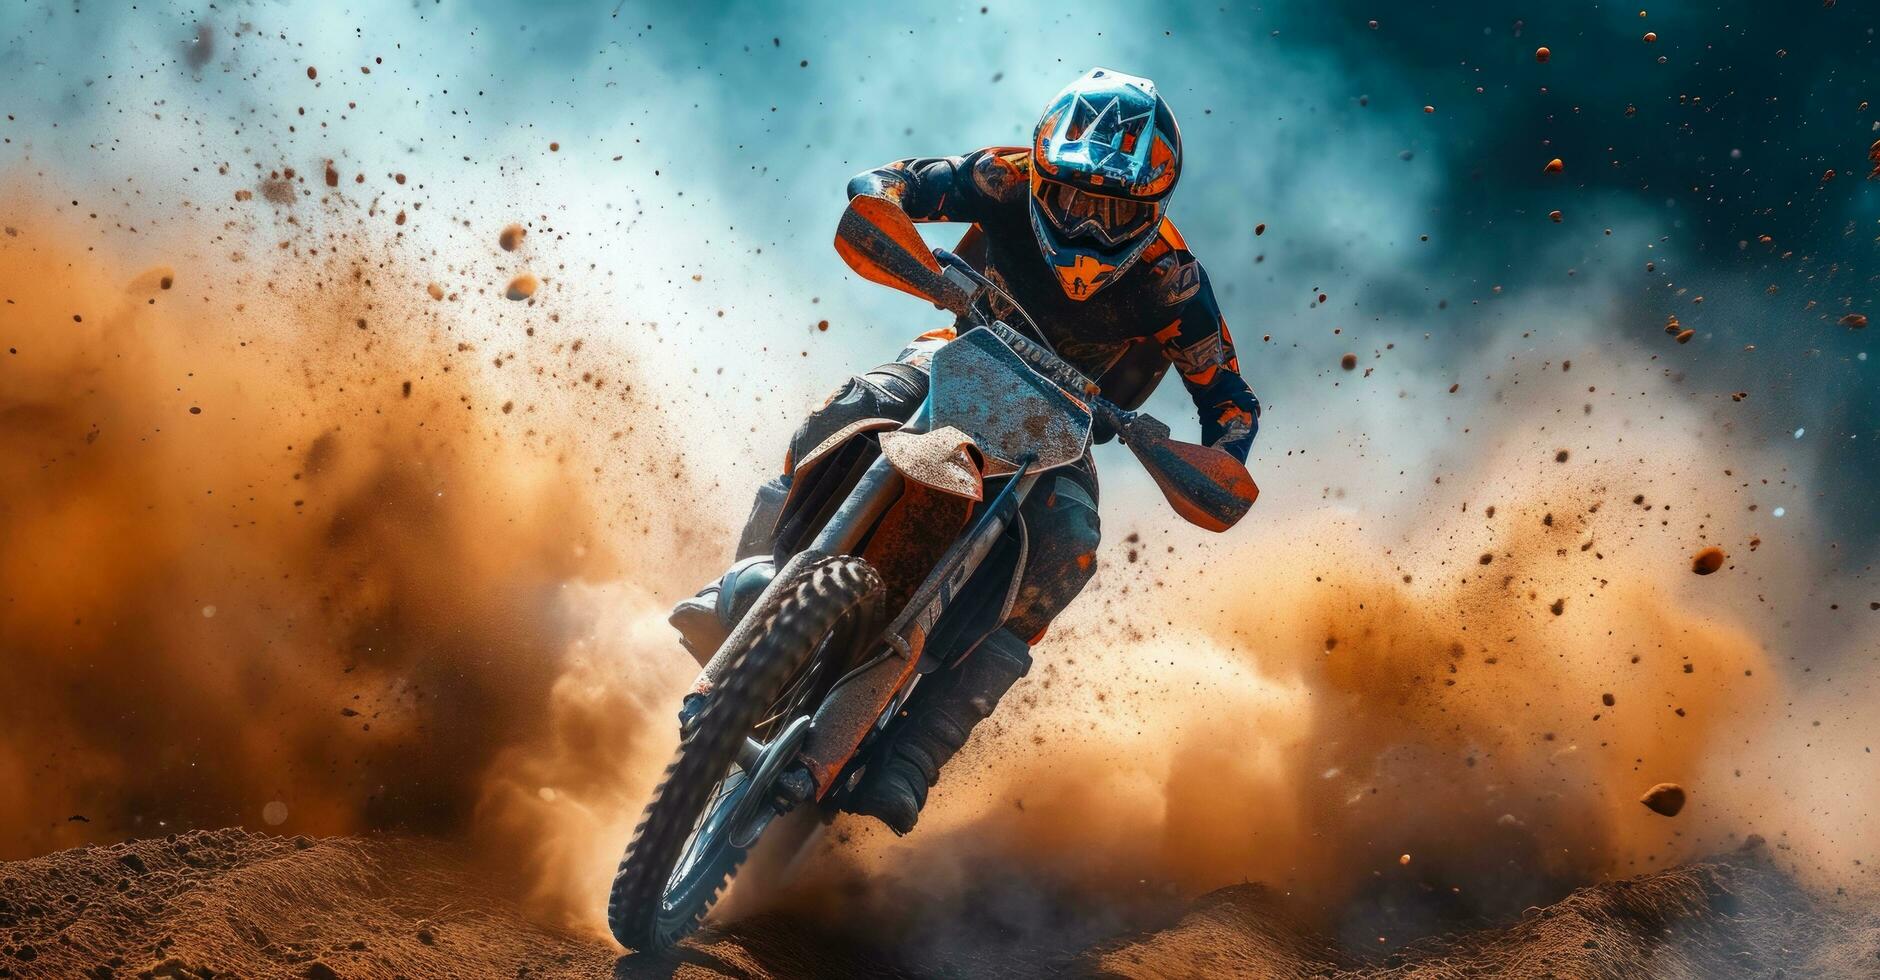 AI generated a dirt bike rider doing stunts in the dirt photo